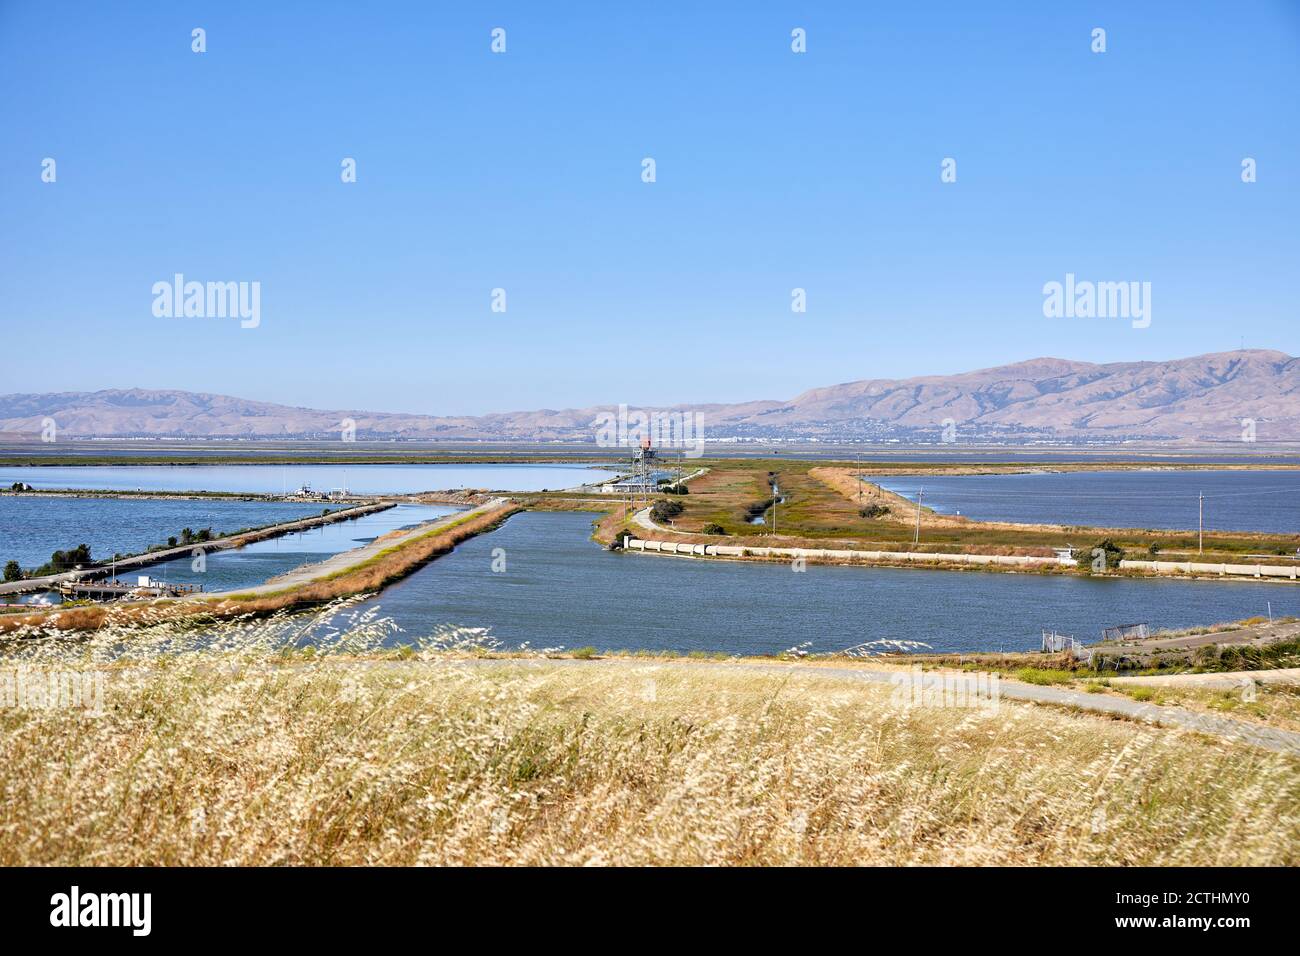 View of Moffett Channel and surrounding ponds, Sunnyvale, California, USA Stock Photo